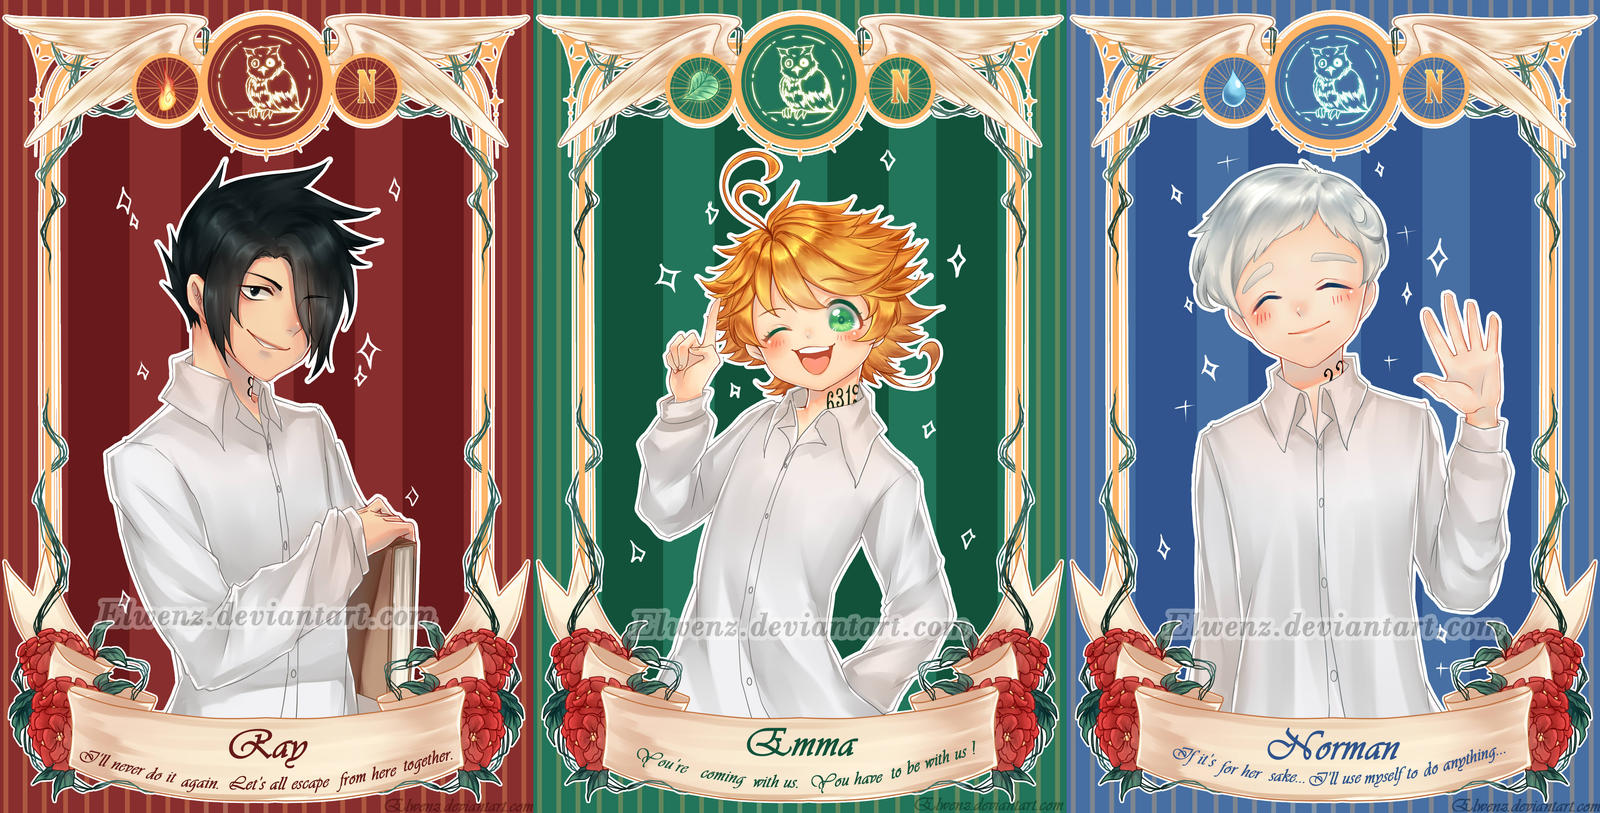 Anime] The Promised Neverland Anime Character Designs Fan Art : r